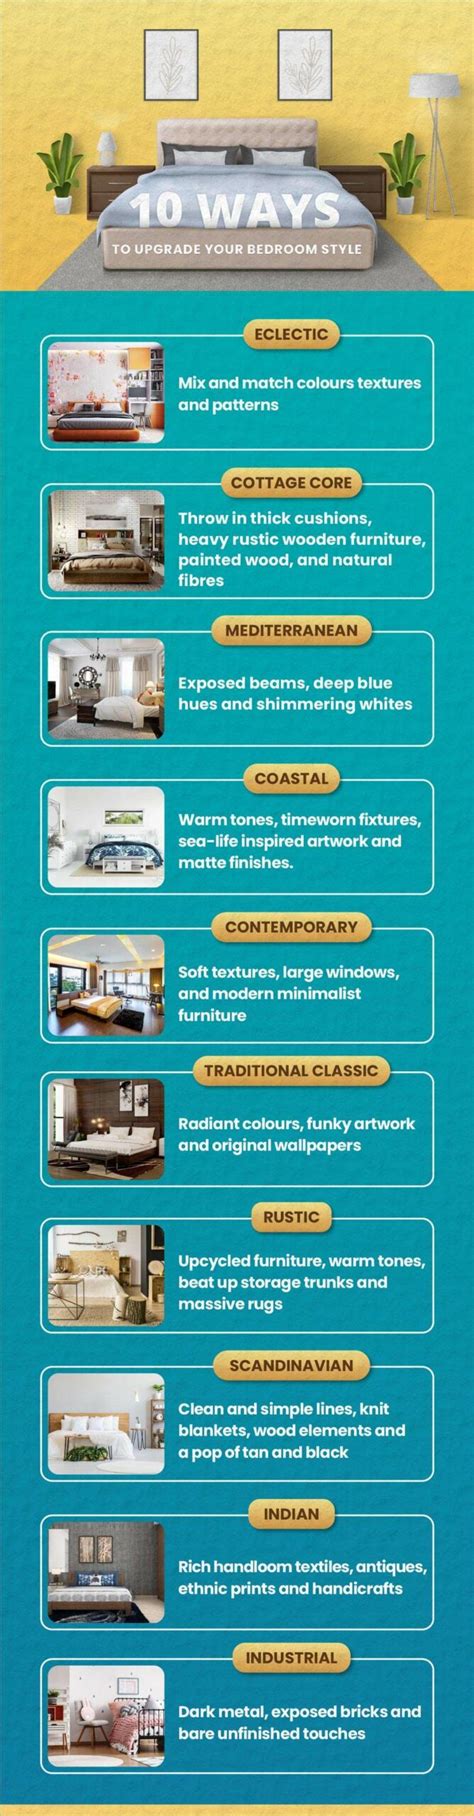 Types Of Interior Design Styles With Pictures Design Talk